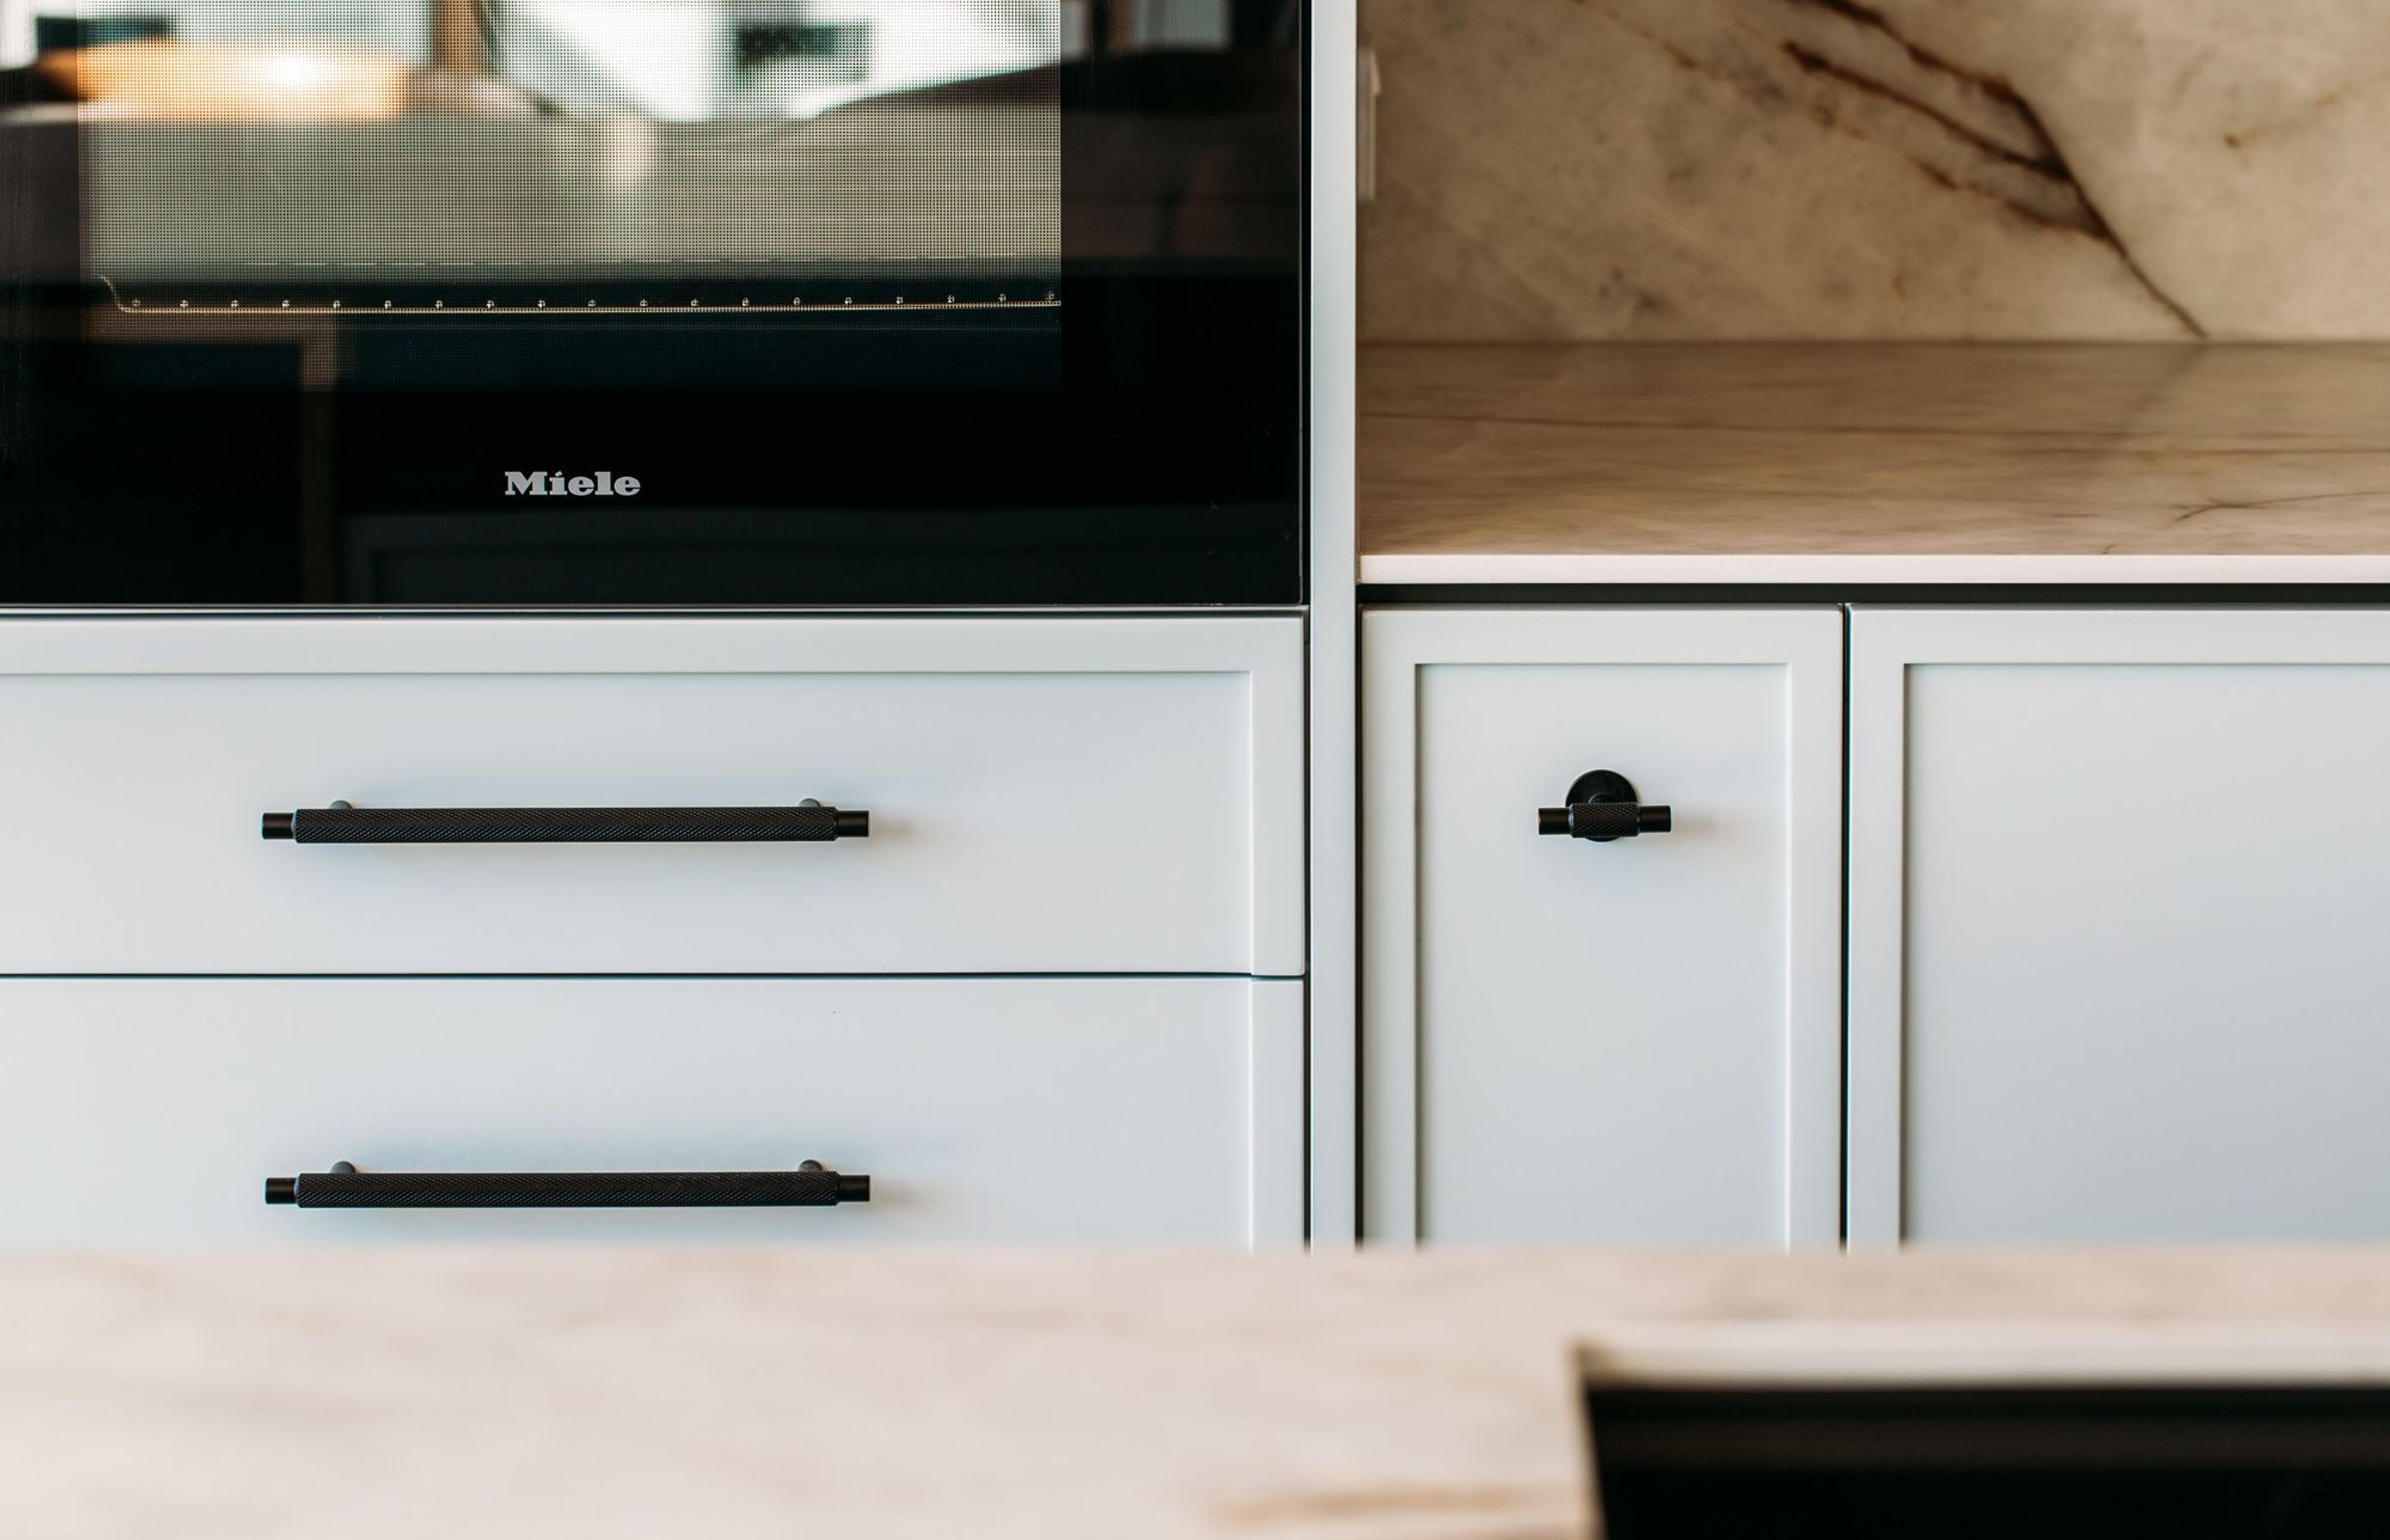 Miele appliances and Archant FP Manor cabinet handles in matt black.